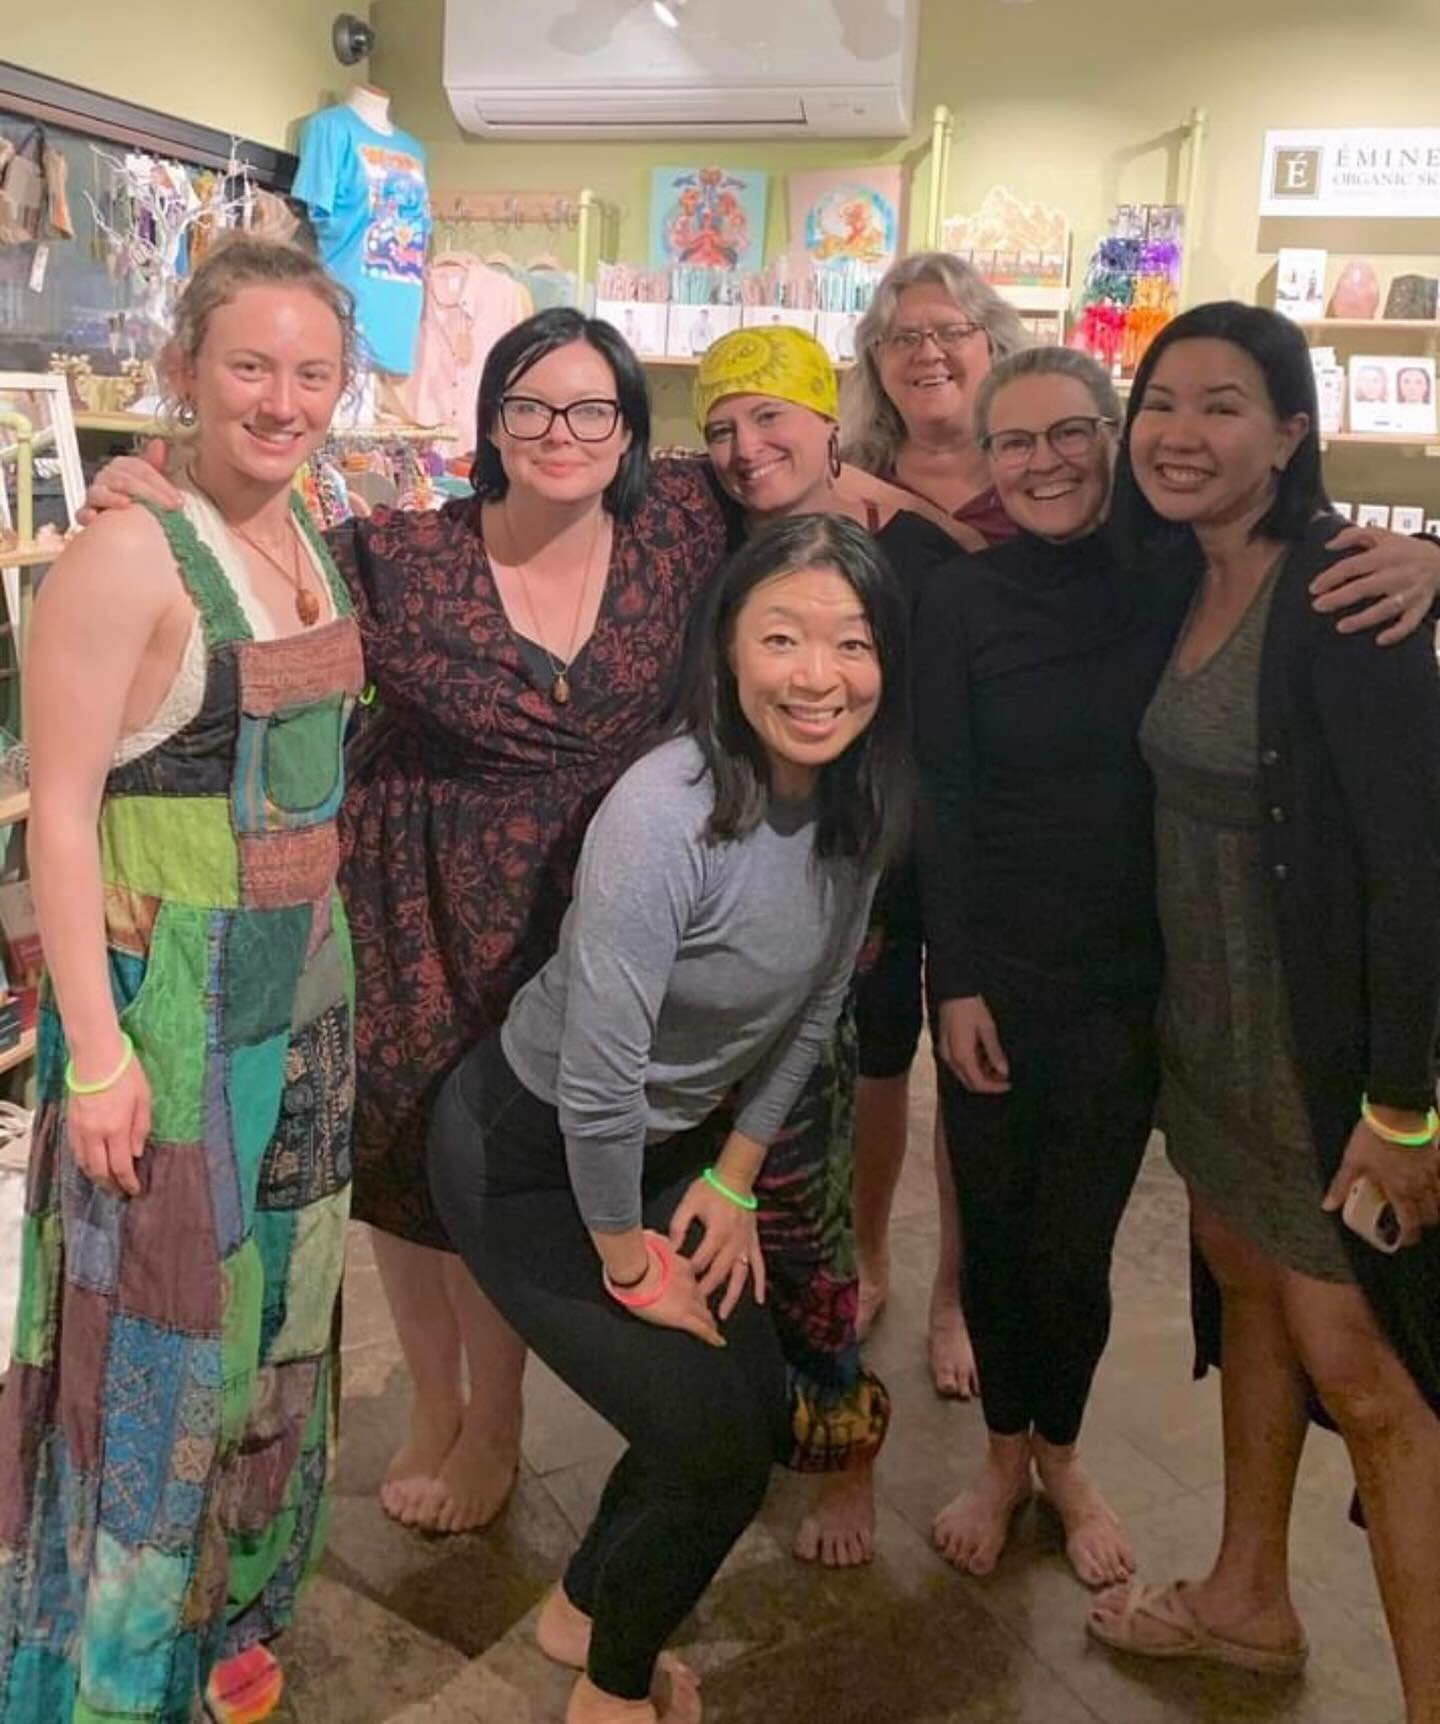 What a blast! Thank you @sunwaterspa for inviting our Yoga Home guides for a night of dancing and soaking! What a fun way to build community! We are so grateful! 🙏☺️💕
#yogahomecos #sunwaterspa #manitouyoga #coloradospringsyoga #yogadanceparty